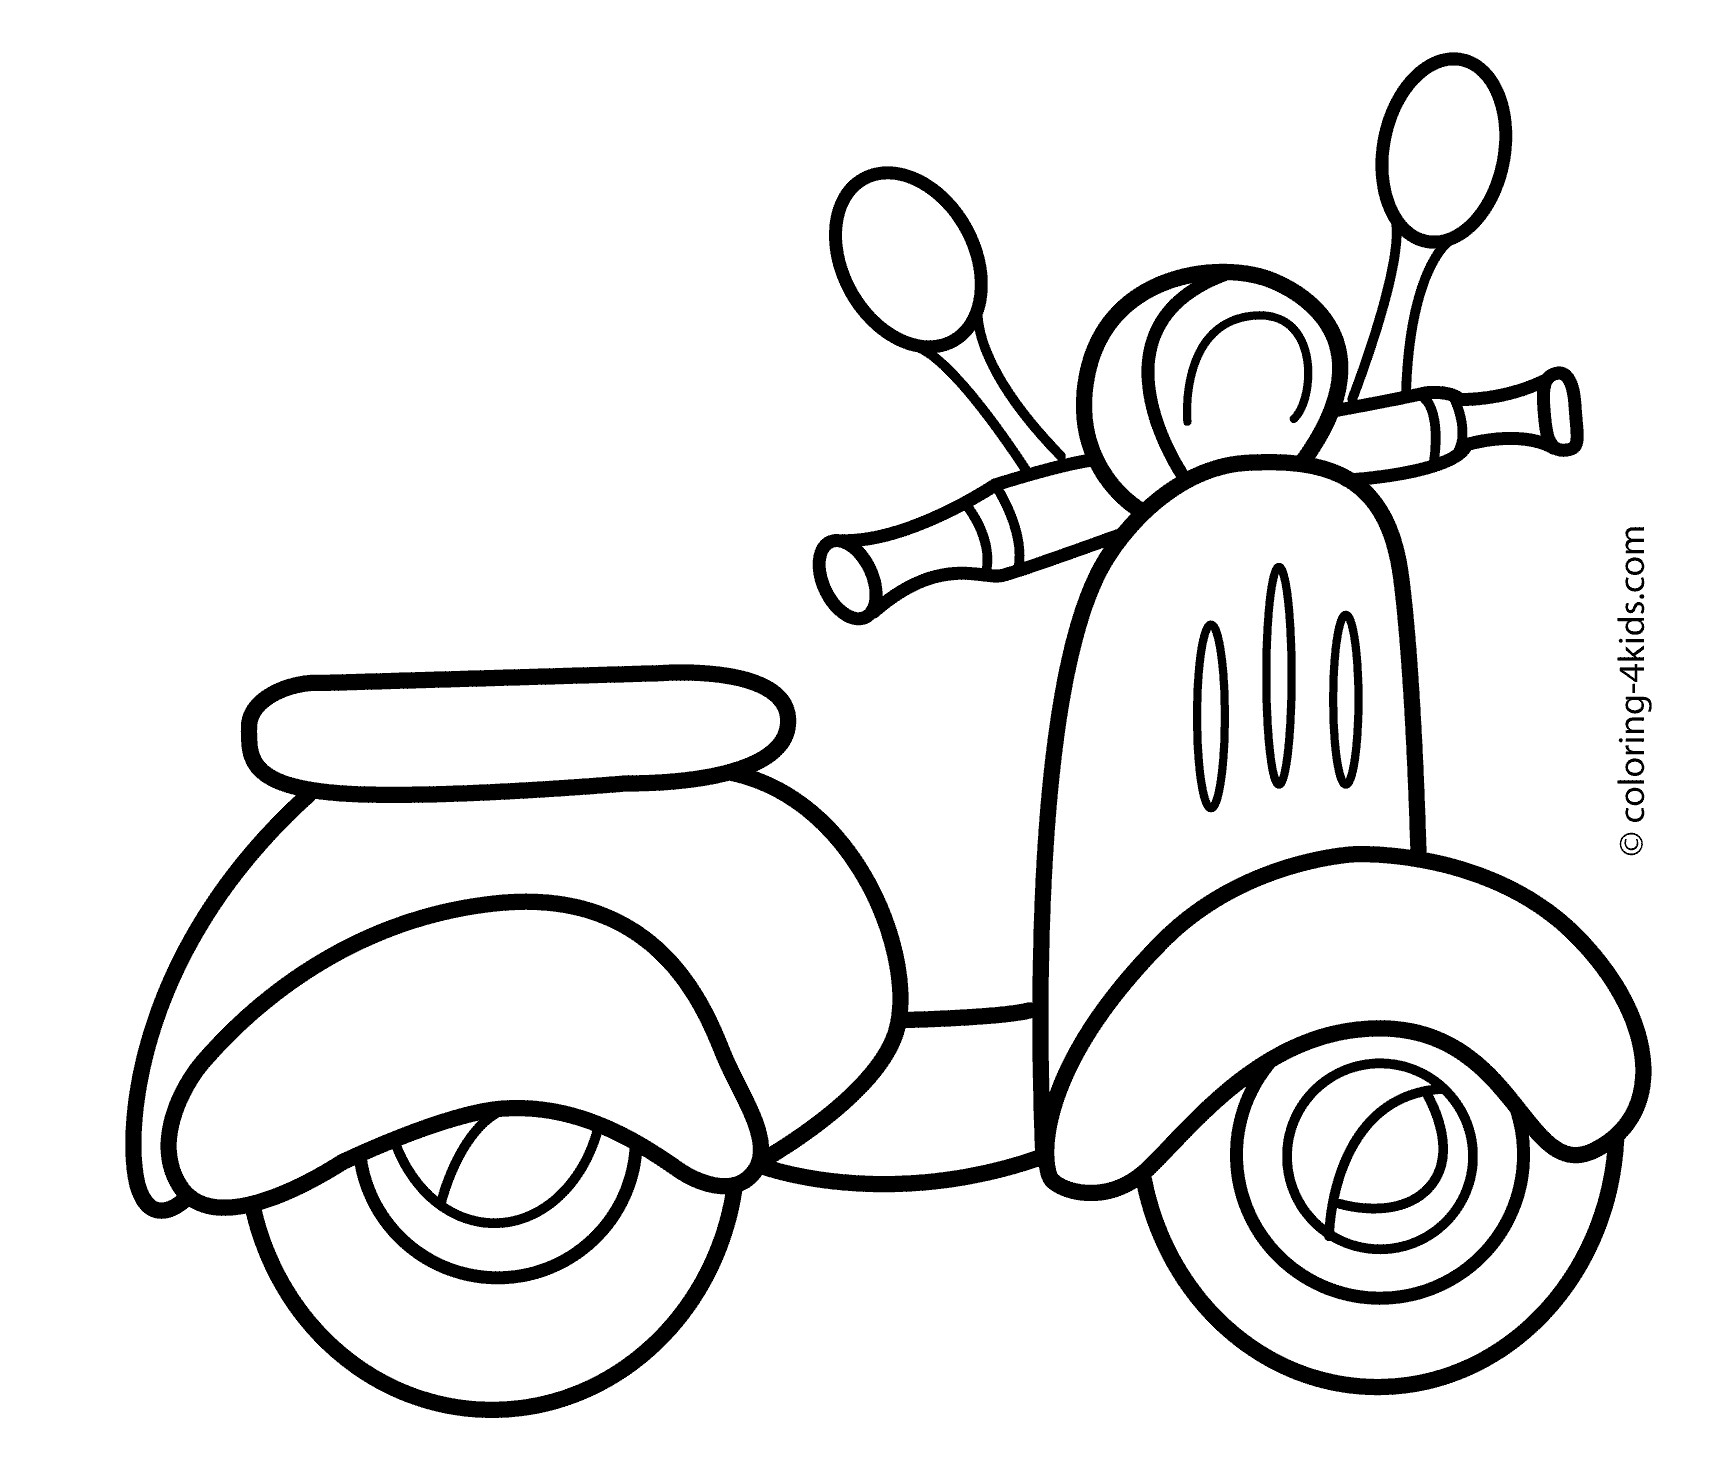 Transportation Coloring Pages For Toddlers
 Scooter transportation coloring pages for kids printable free